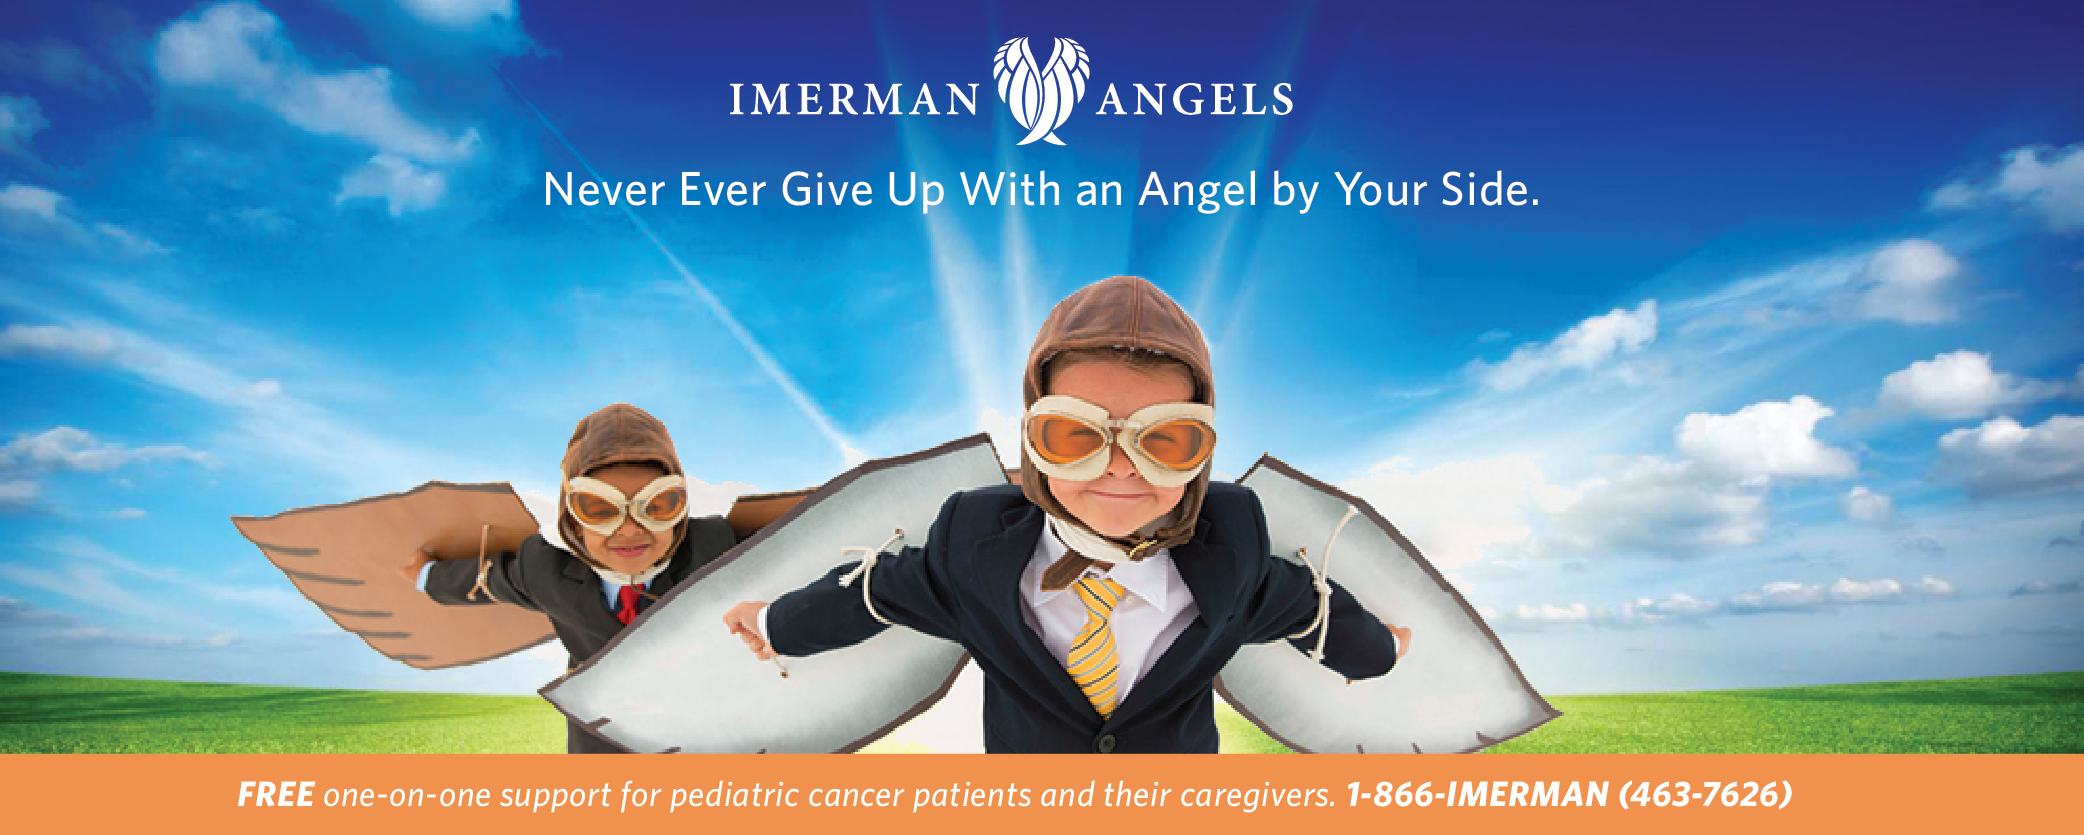 Imerman Angels Free One On One Cancer Support